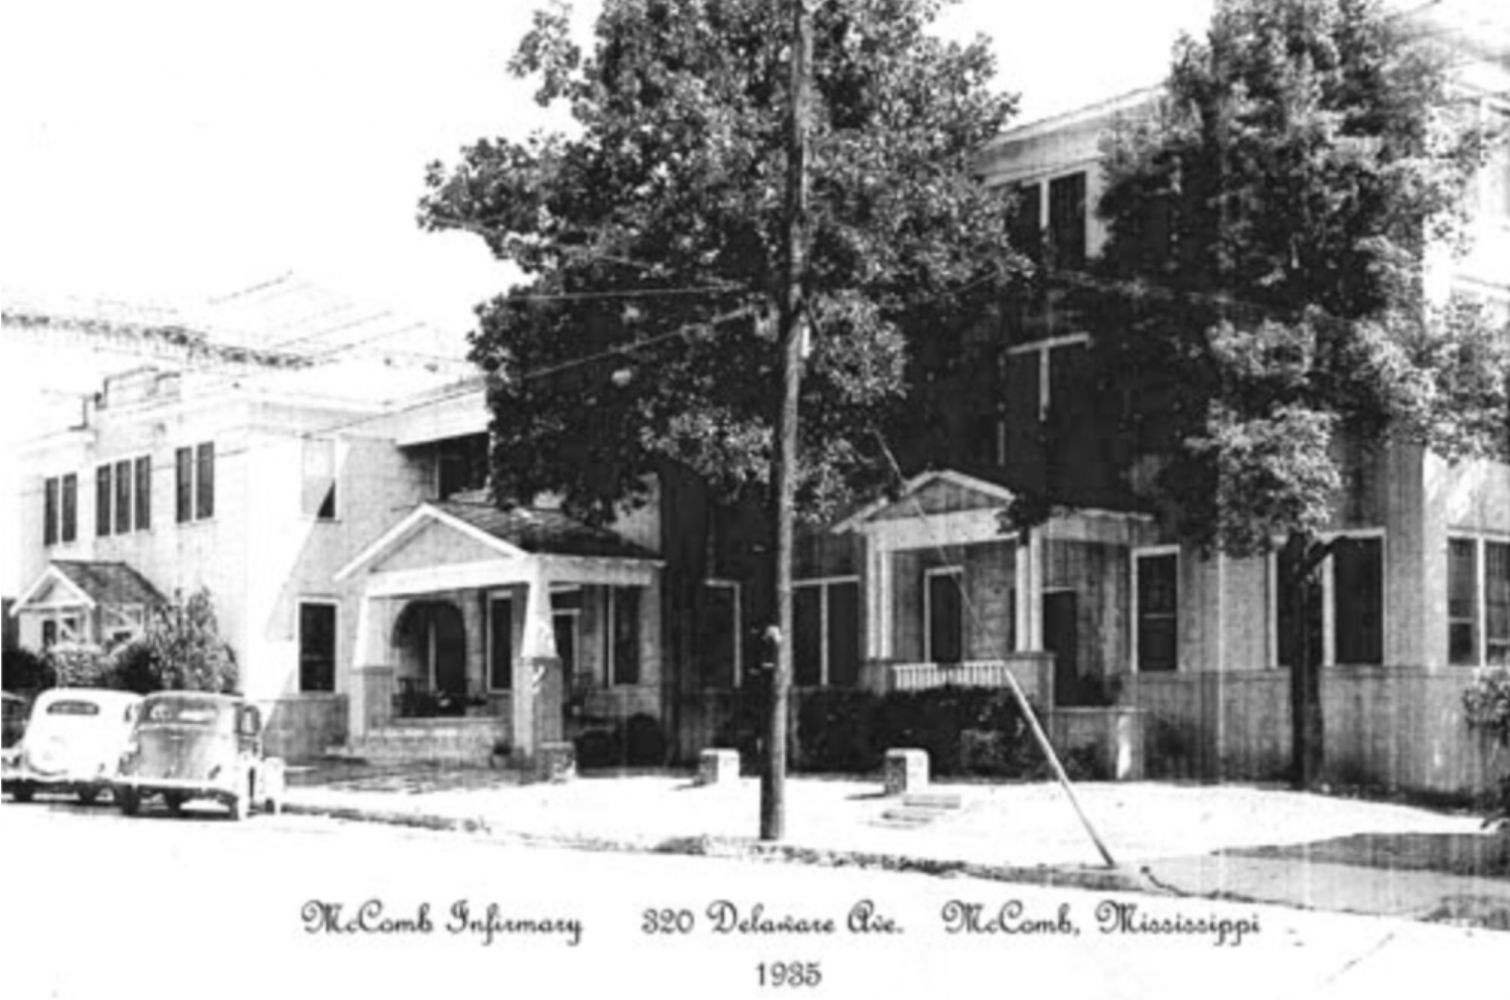 Old black and white image of the building